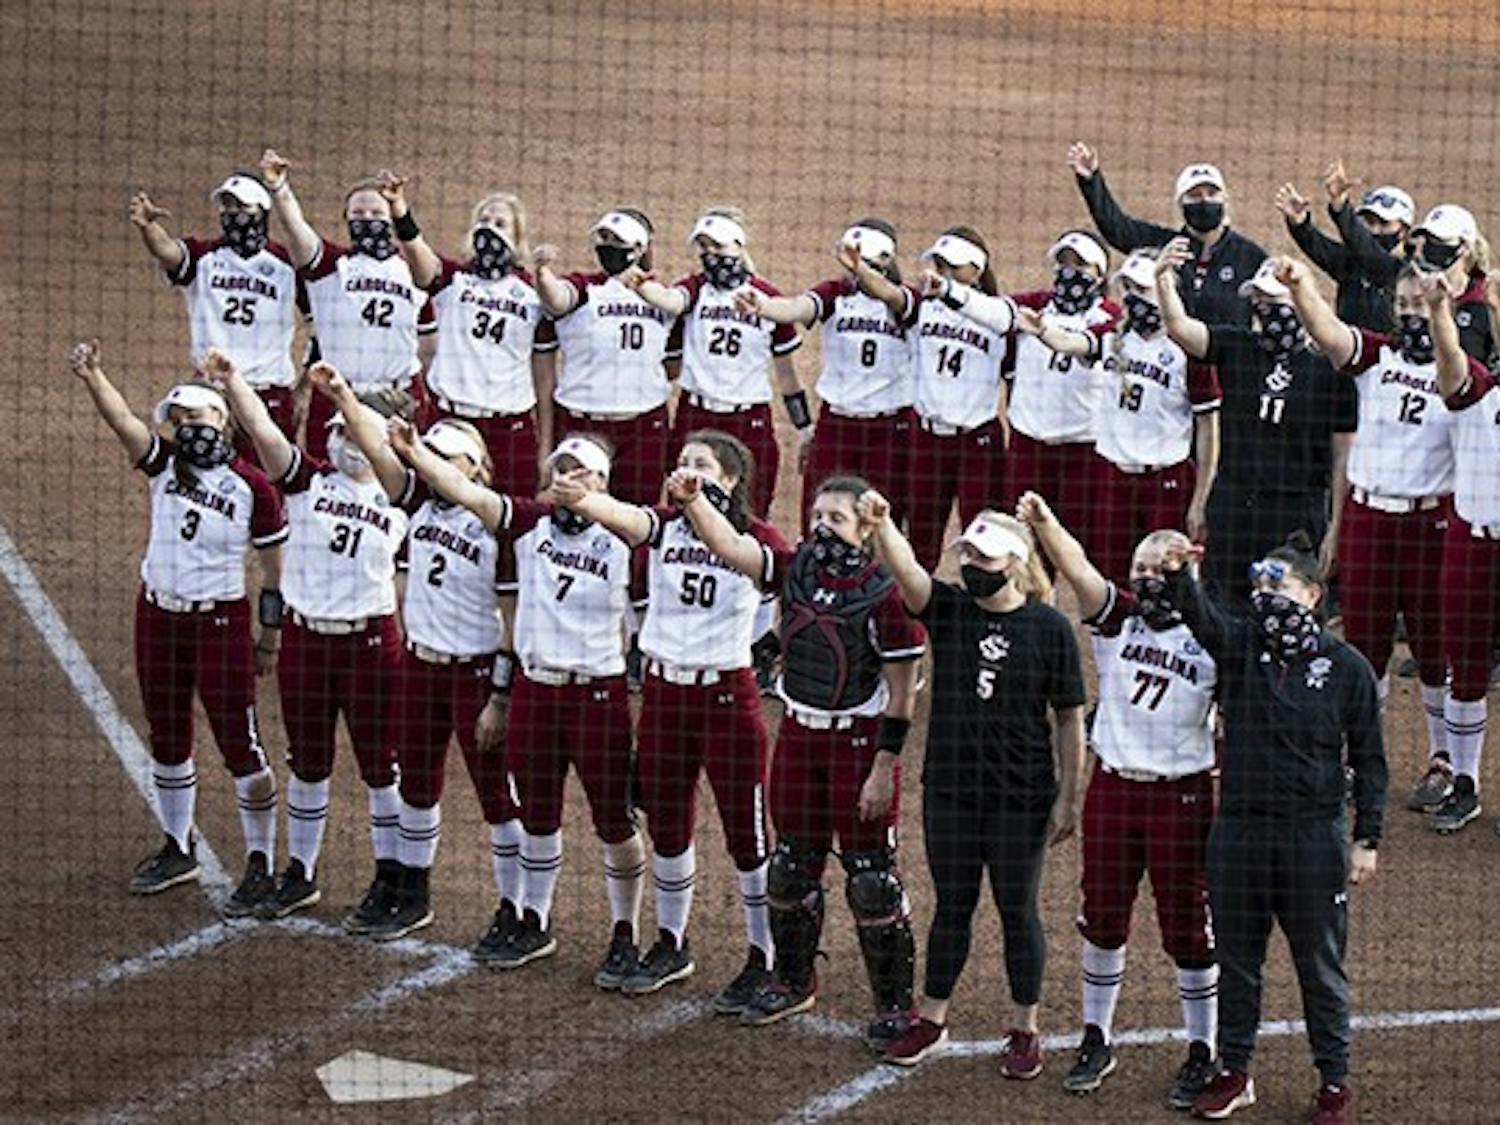 &nbsp;The Lady Gamecocks celebrate the mercy rule win against Coastal Carolina University. Final score of the second game in the doubleheader was 10-0 for the Lady Gamecocks.&nbsp;